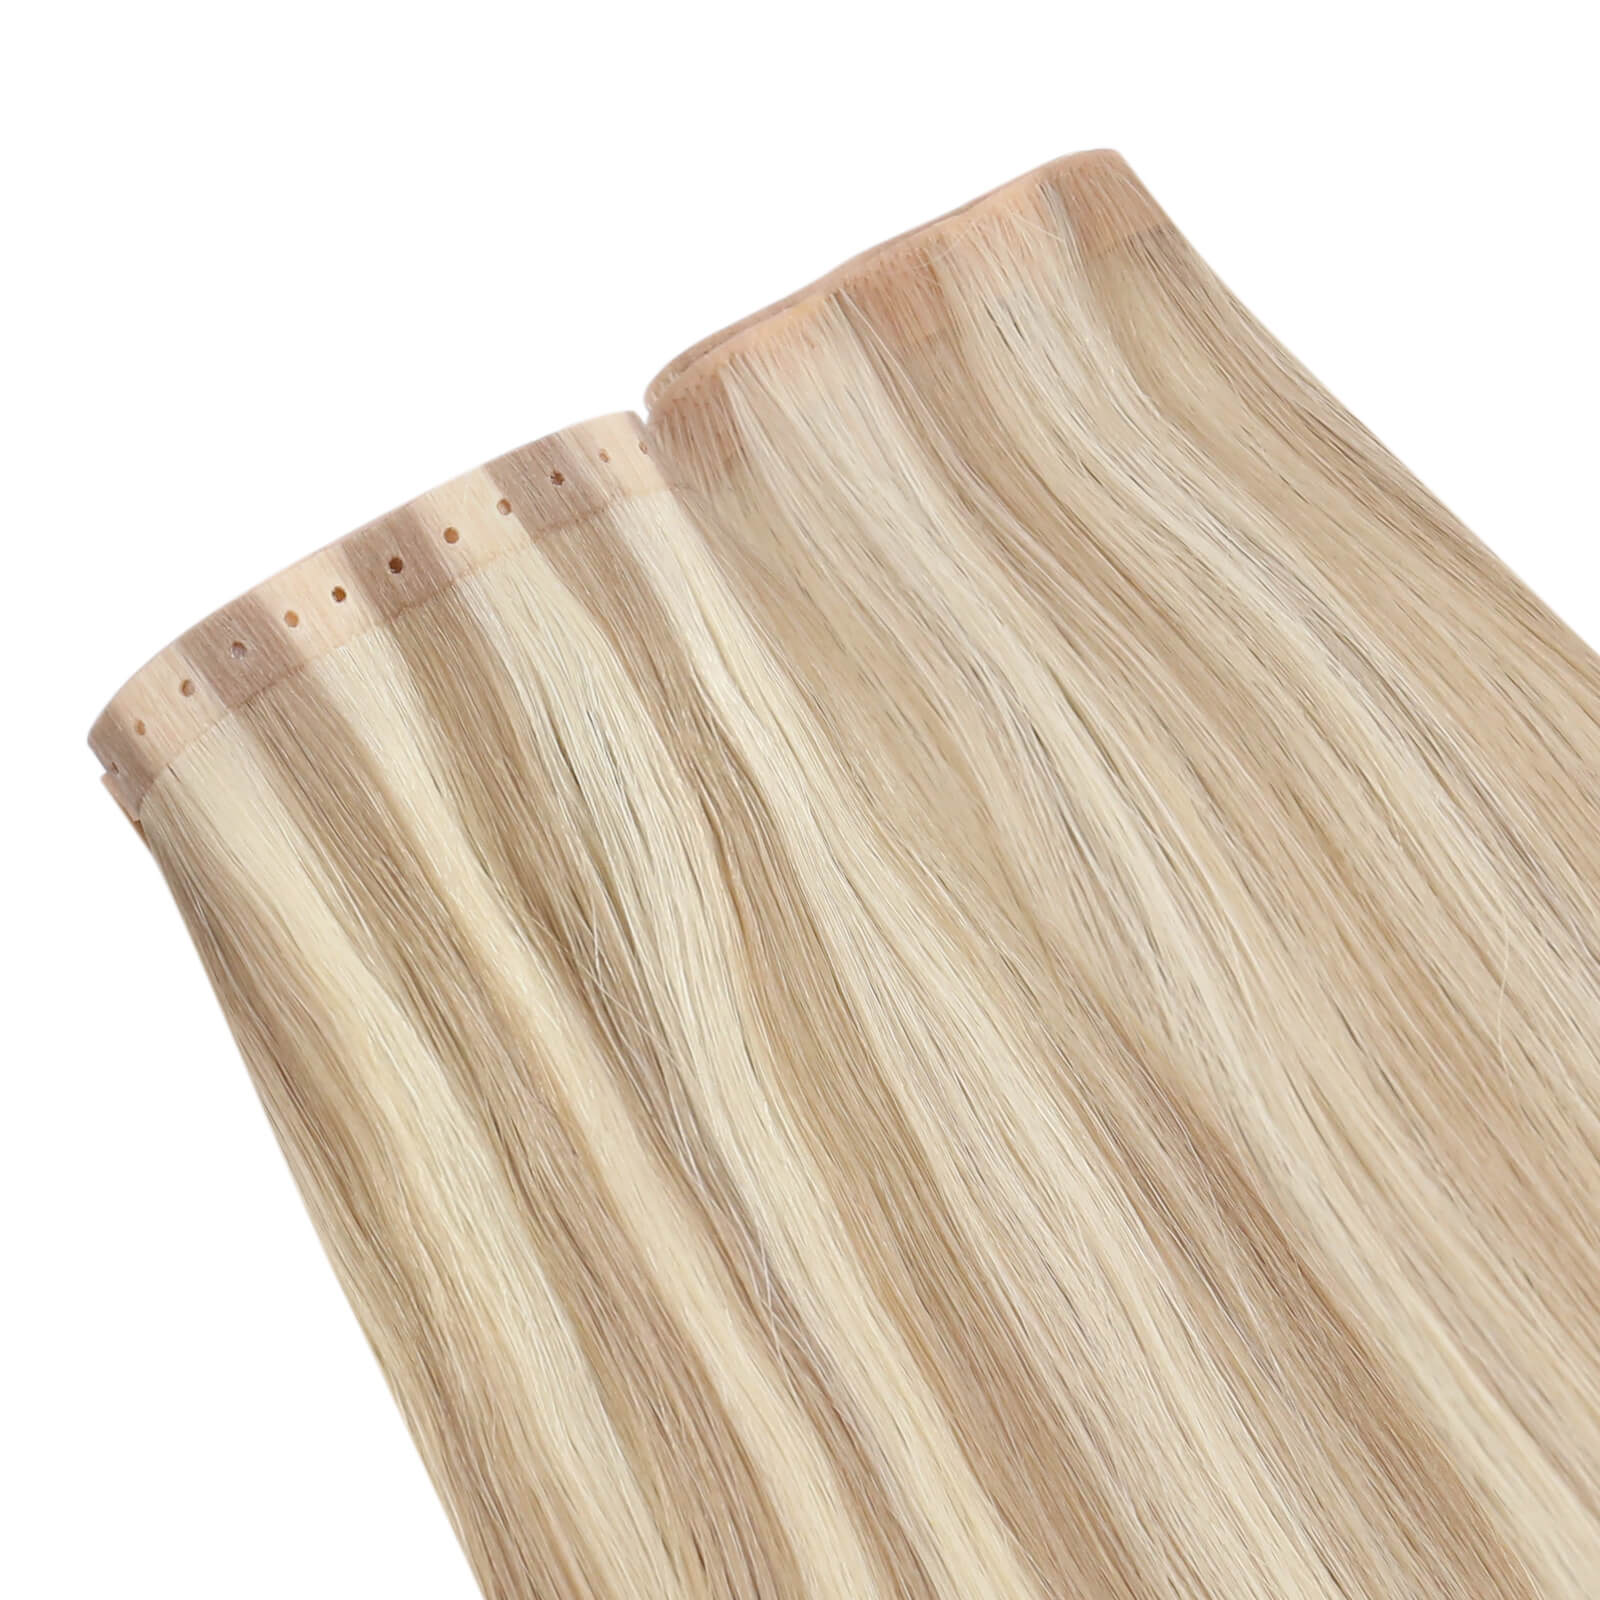 hair extensions,weft hair extensions,XO Invisible weft,XO hair extensions,xo invisible weft extensions,pu wefts hair extensions,18 inch hair extensions,pu hole invisible wefts